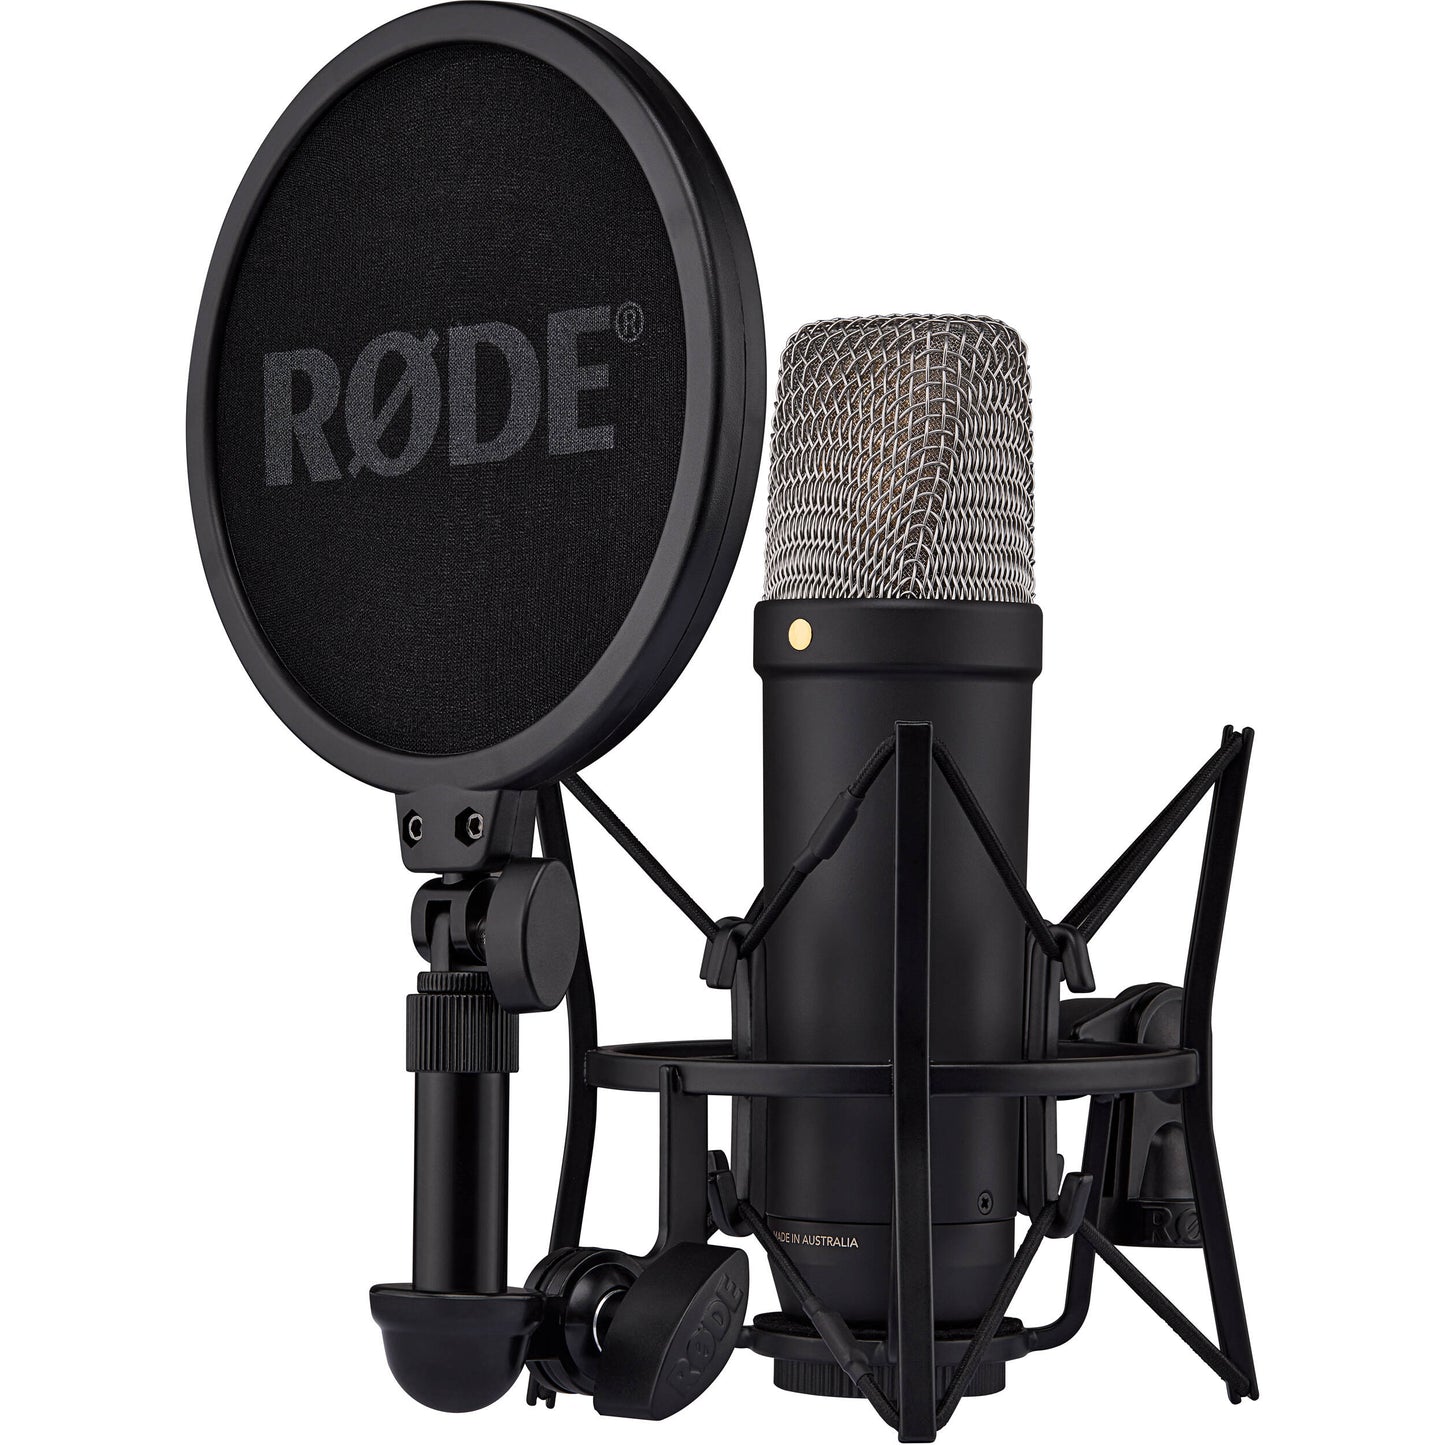 RODE NT1 5TH Generation Large-Diaphragm Cardioid Condenser Microphone